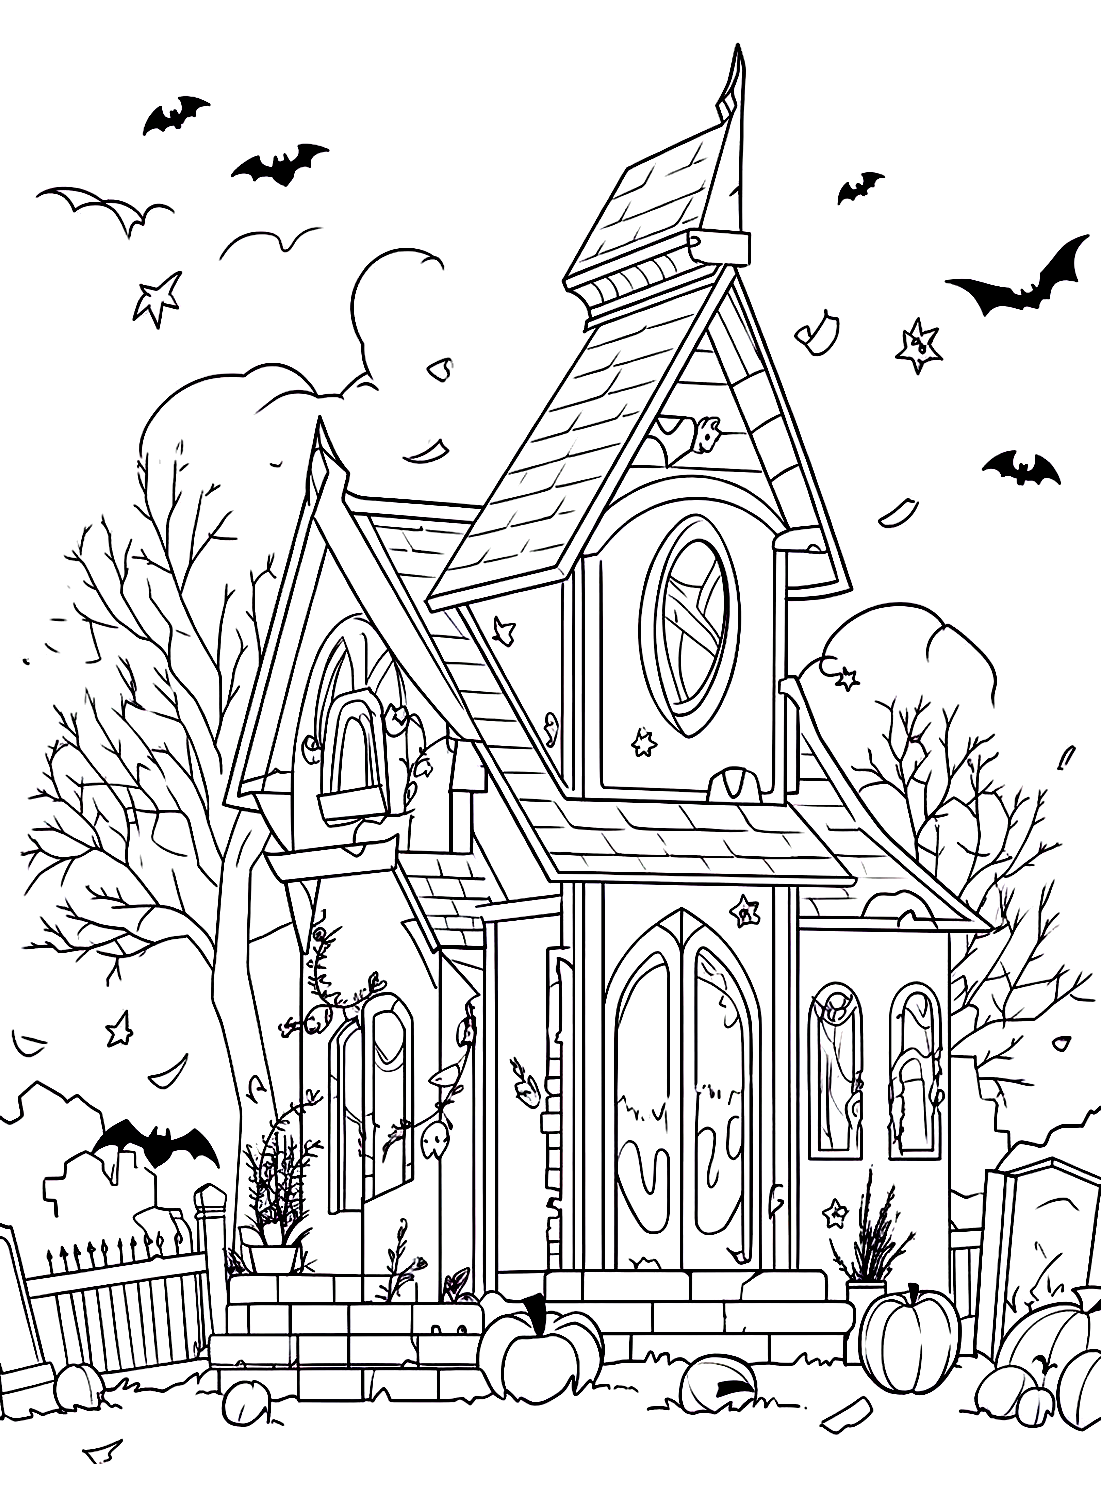 Haunted house printable - Free Printable Coloring Pages